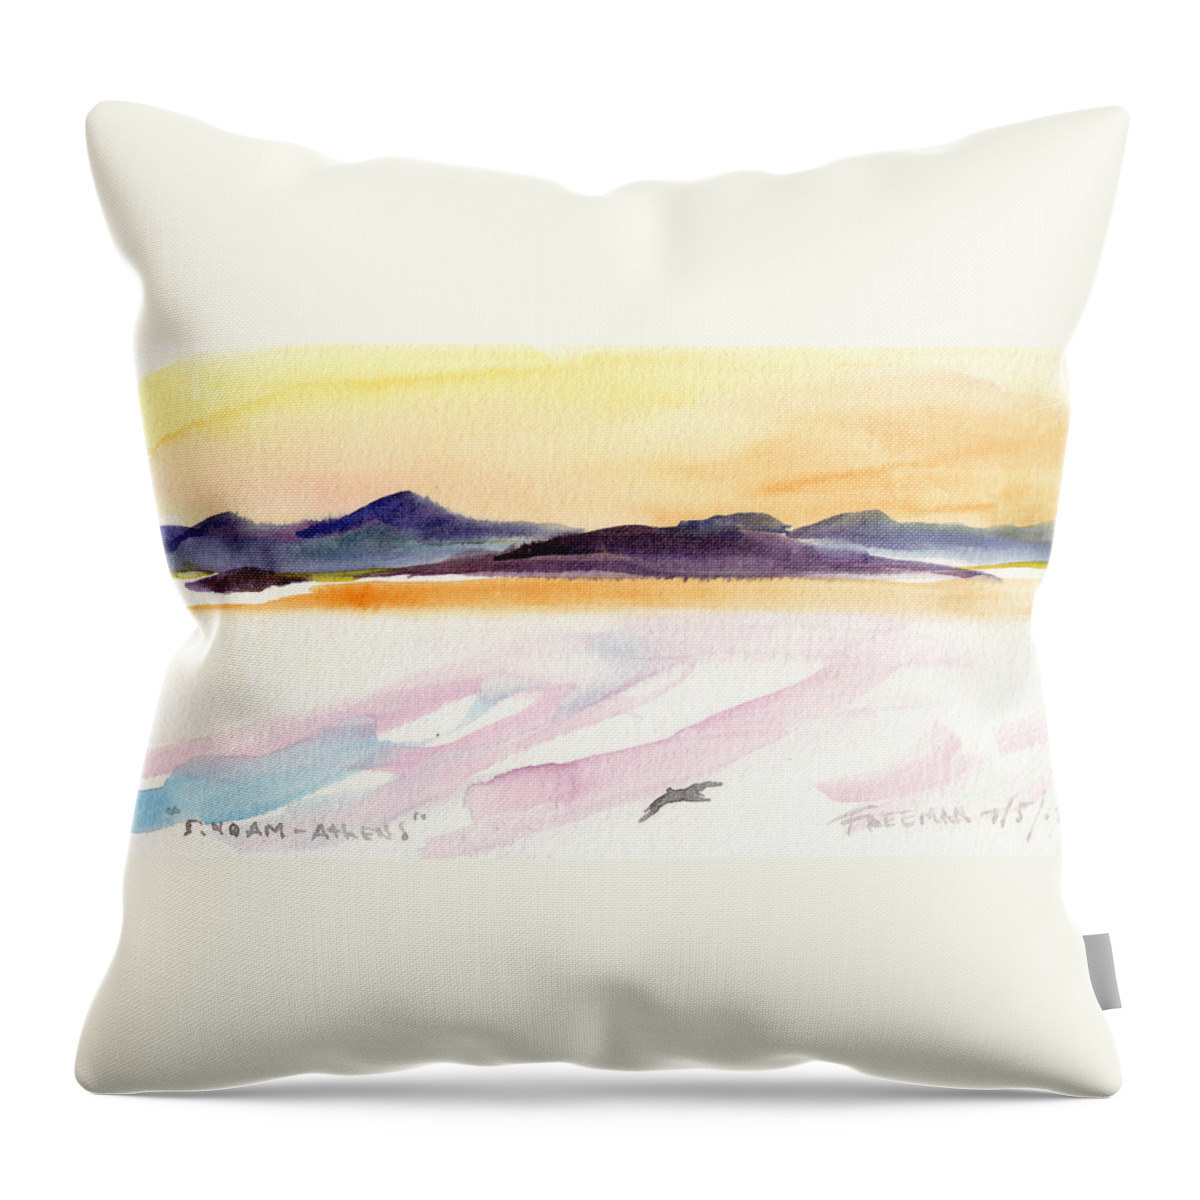 Crystal Cruises Throw Pillow featuring the painting 5hr40am Athens by Valerie Freeman